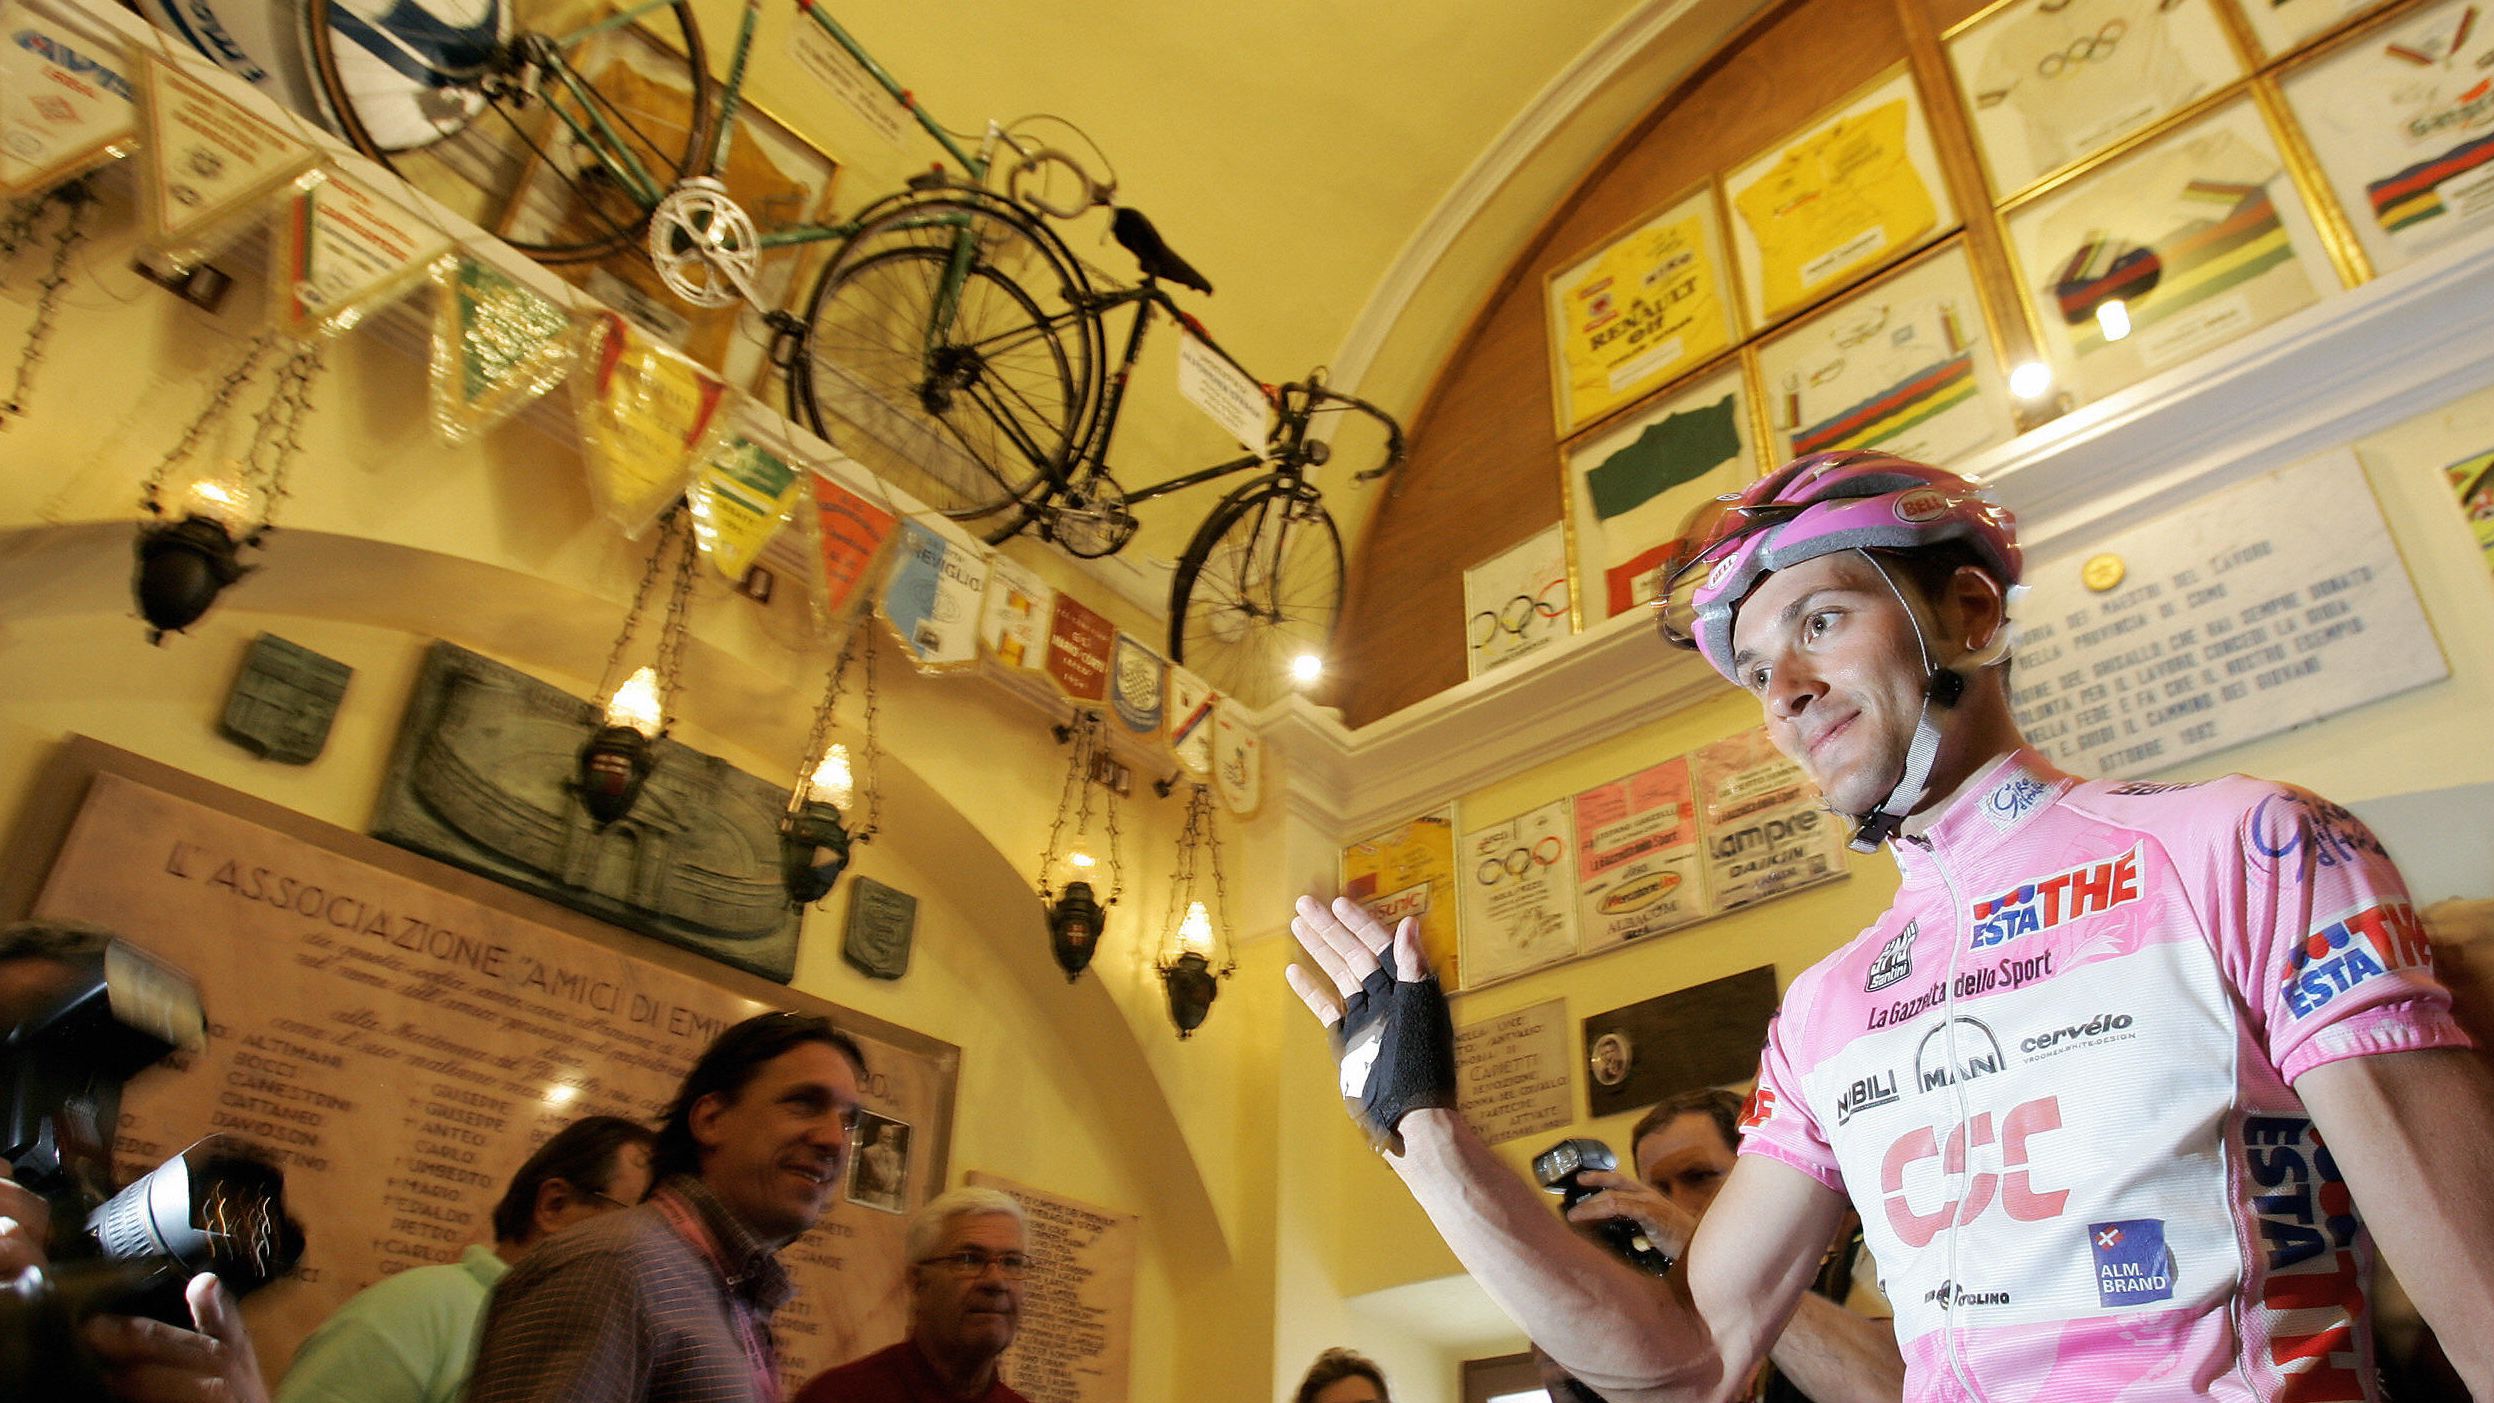 Italy's Ivan Basso, wearing the leader's pink jersey, visits the Ghisallo chapel during the 2006 Giro d'Italia.